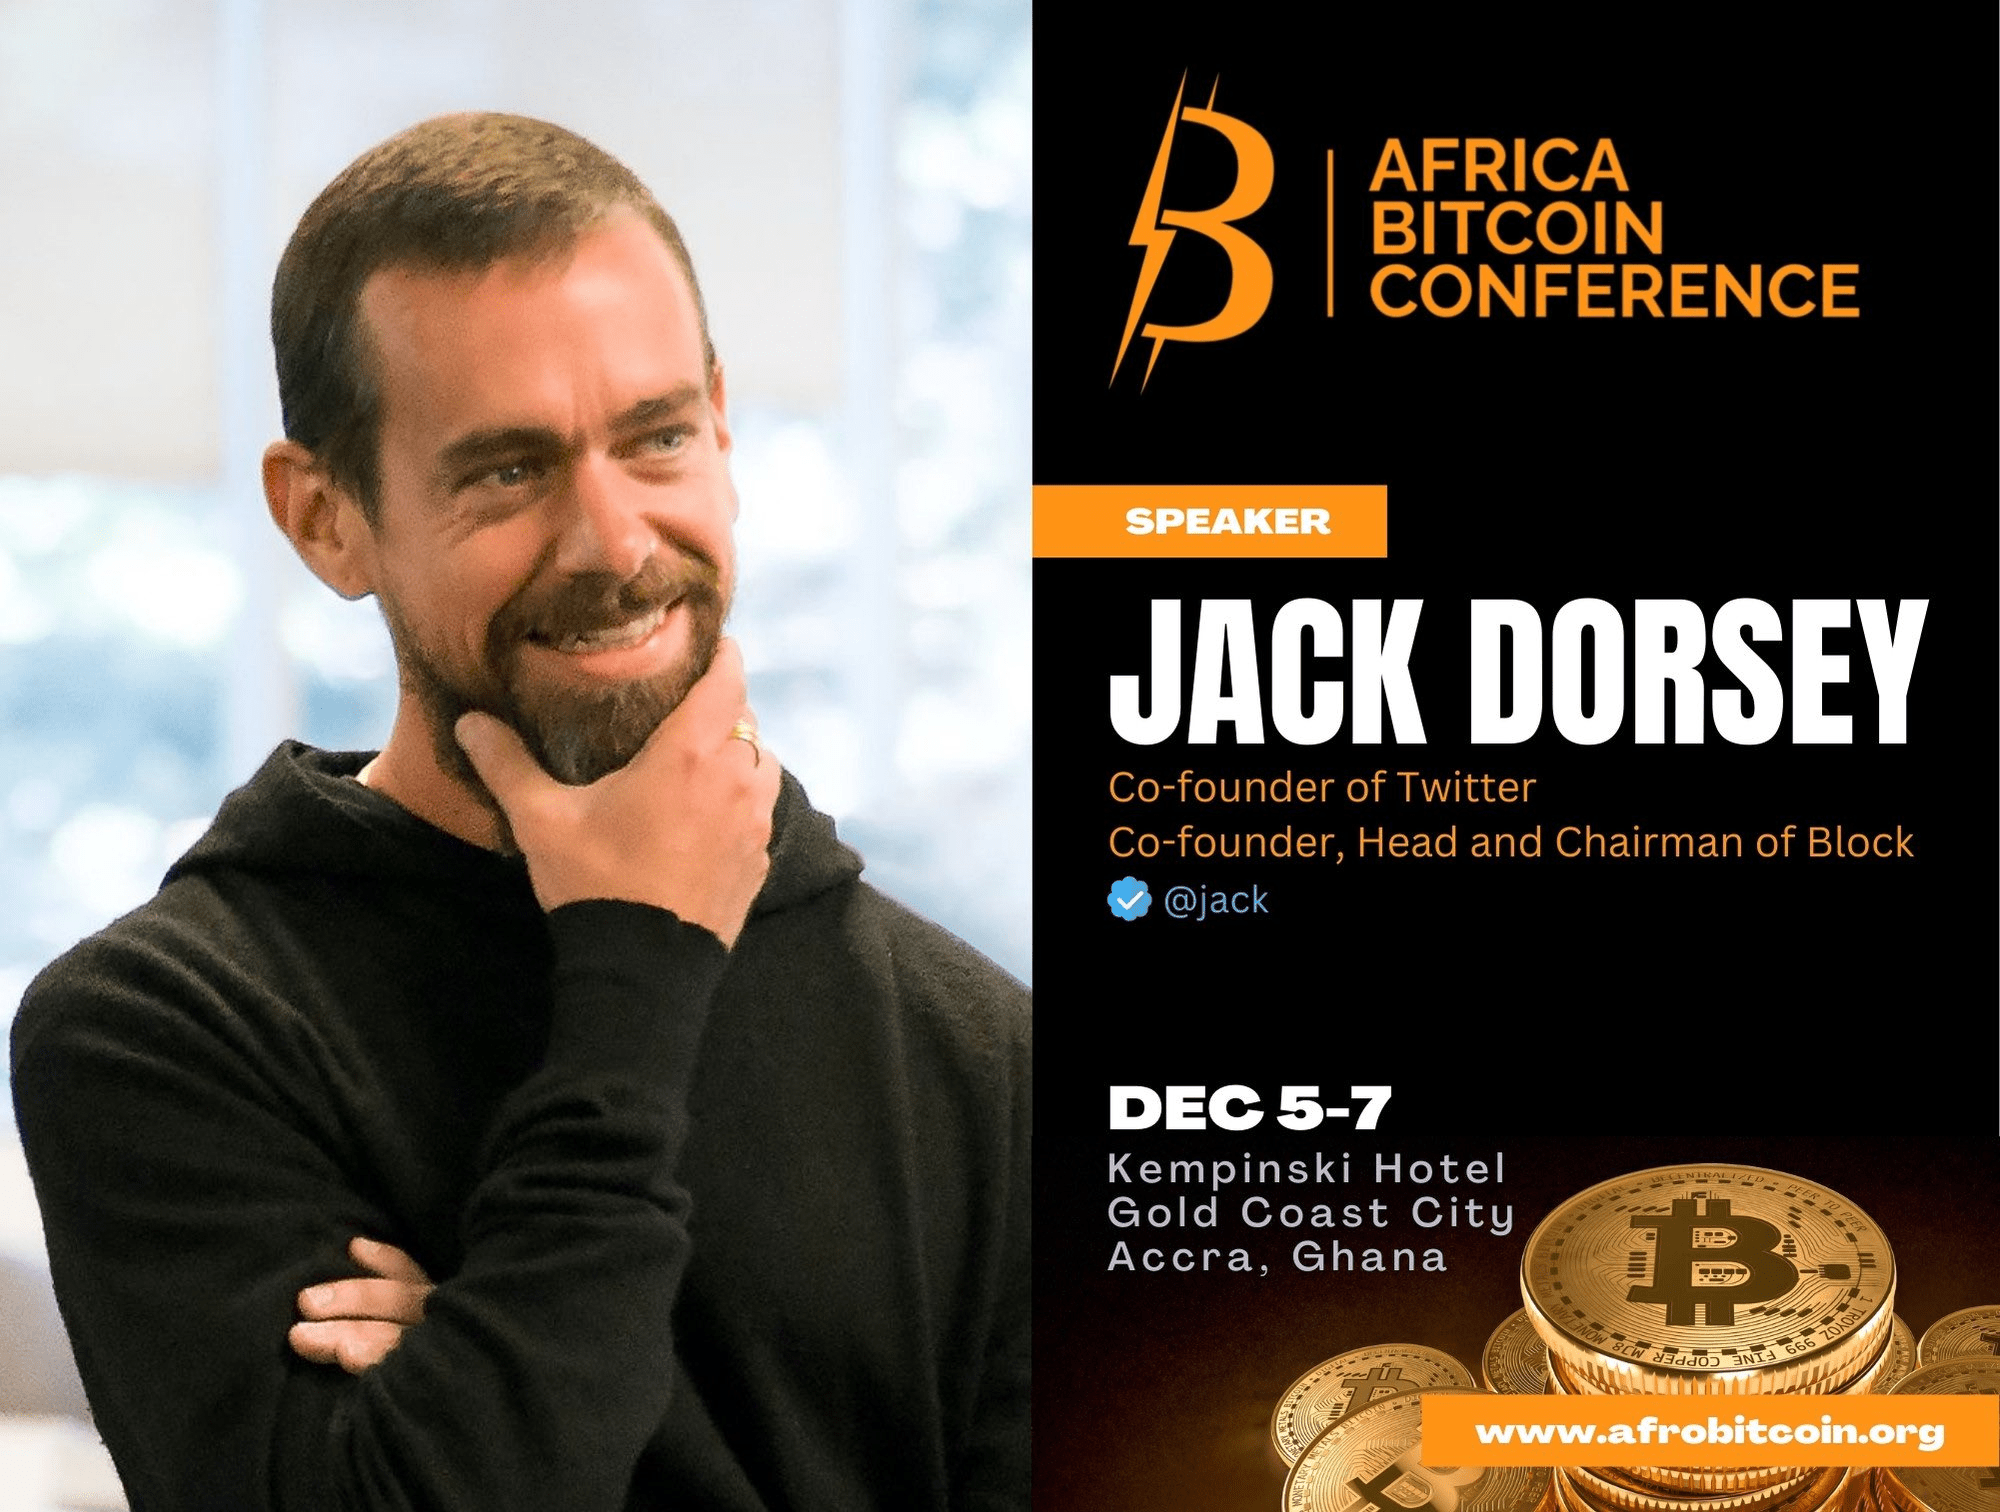 Twitter Co-founder Jack Dorsey to speak at the inaugural Africa Bitcoin Conference in Accra